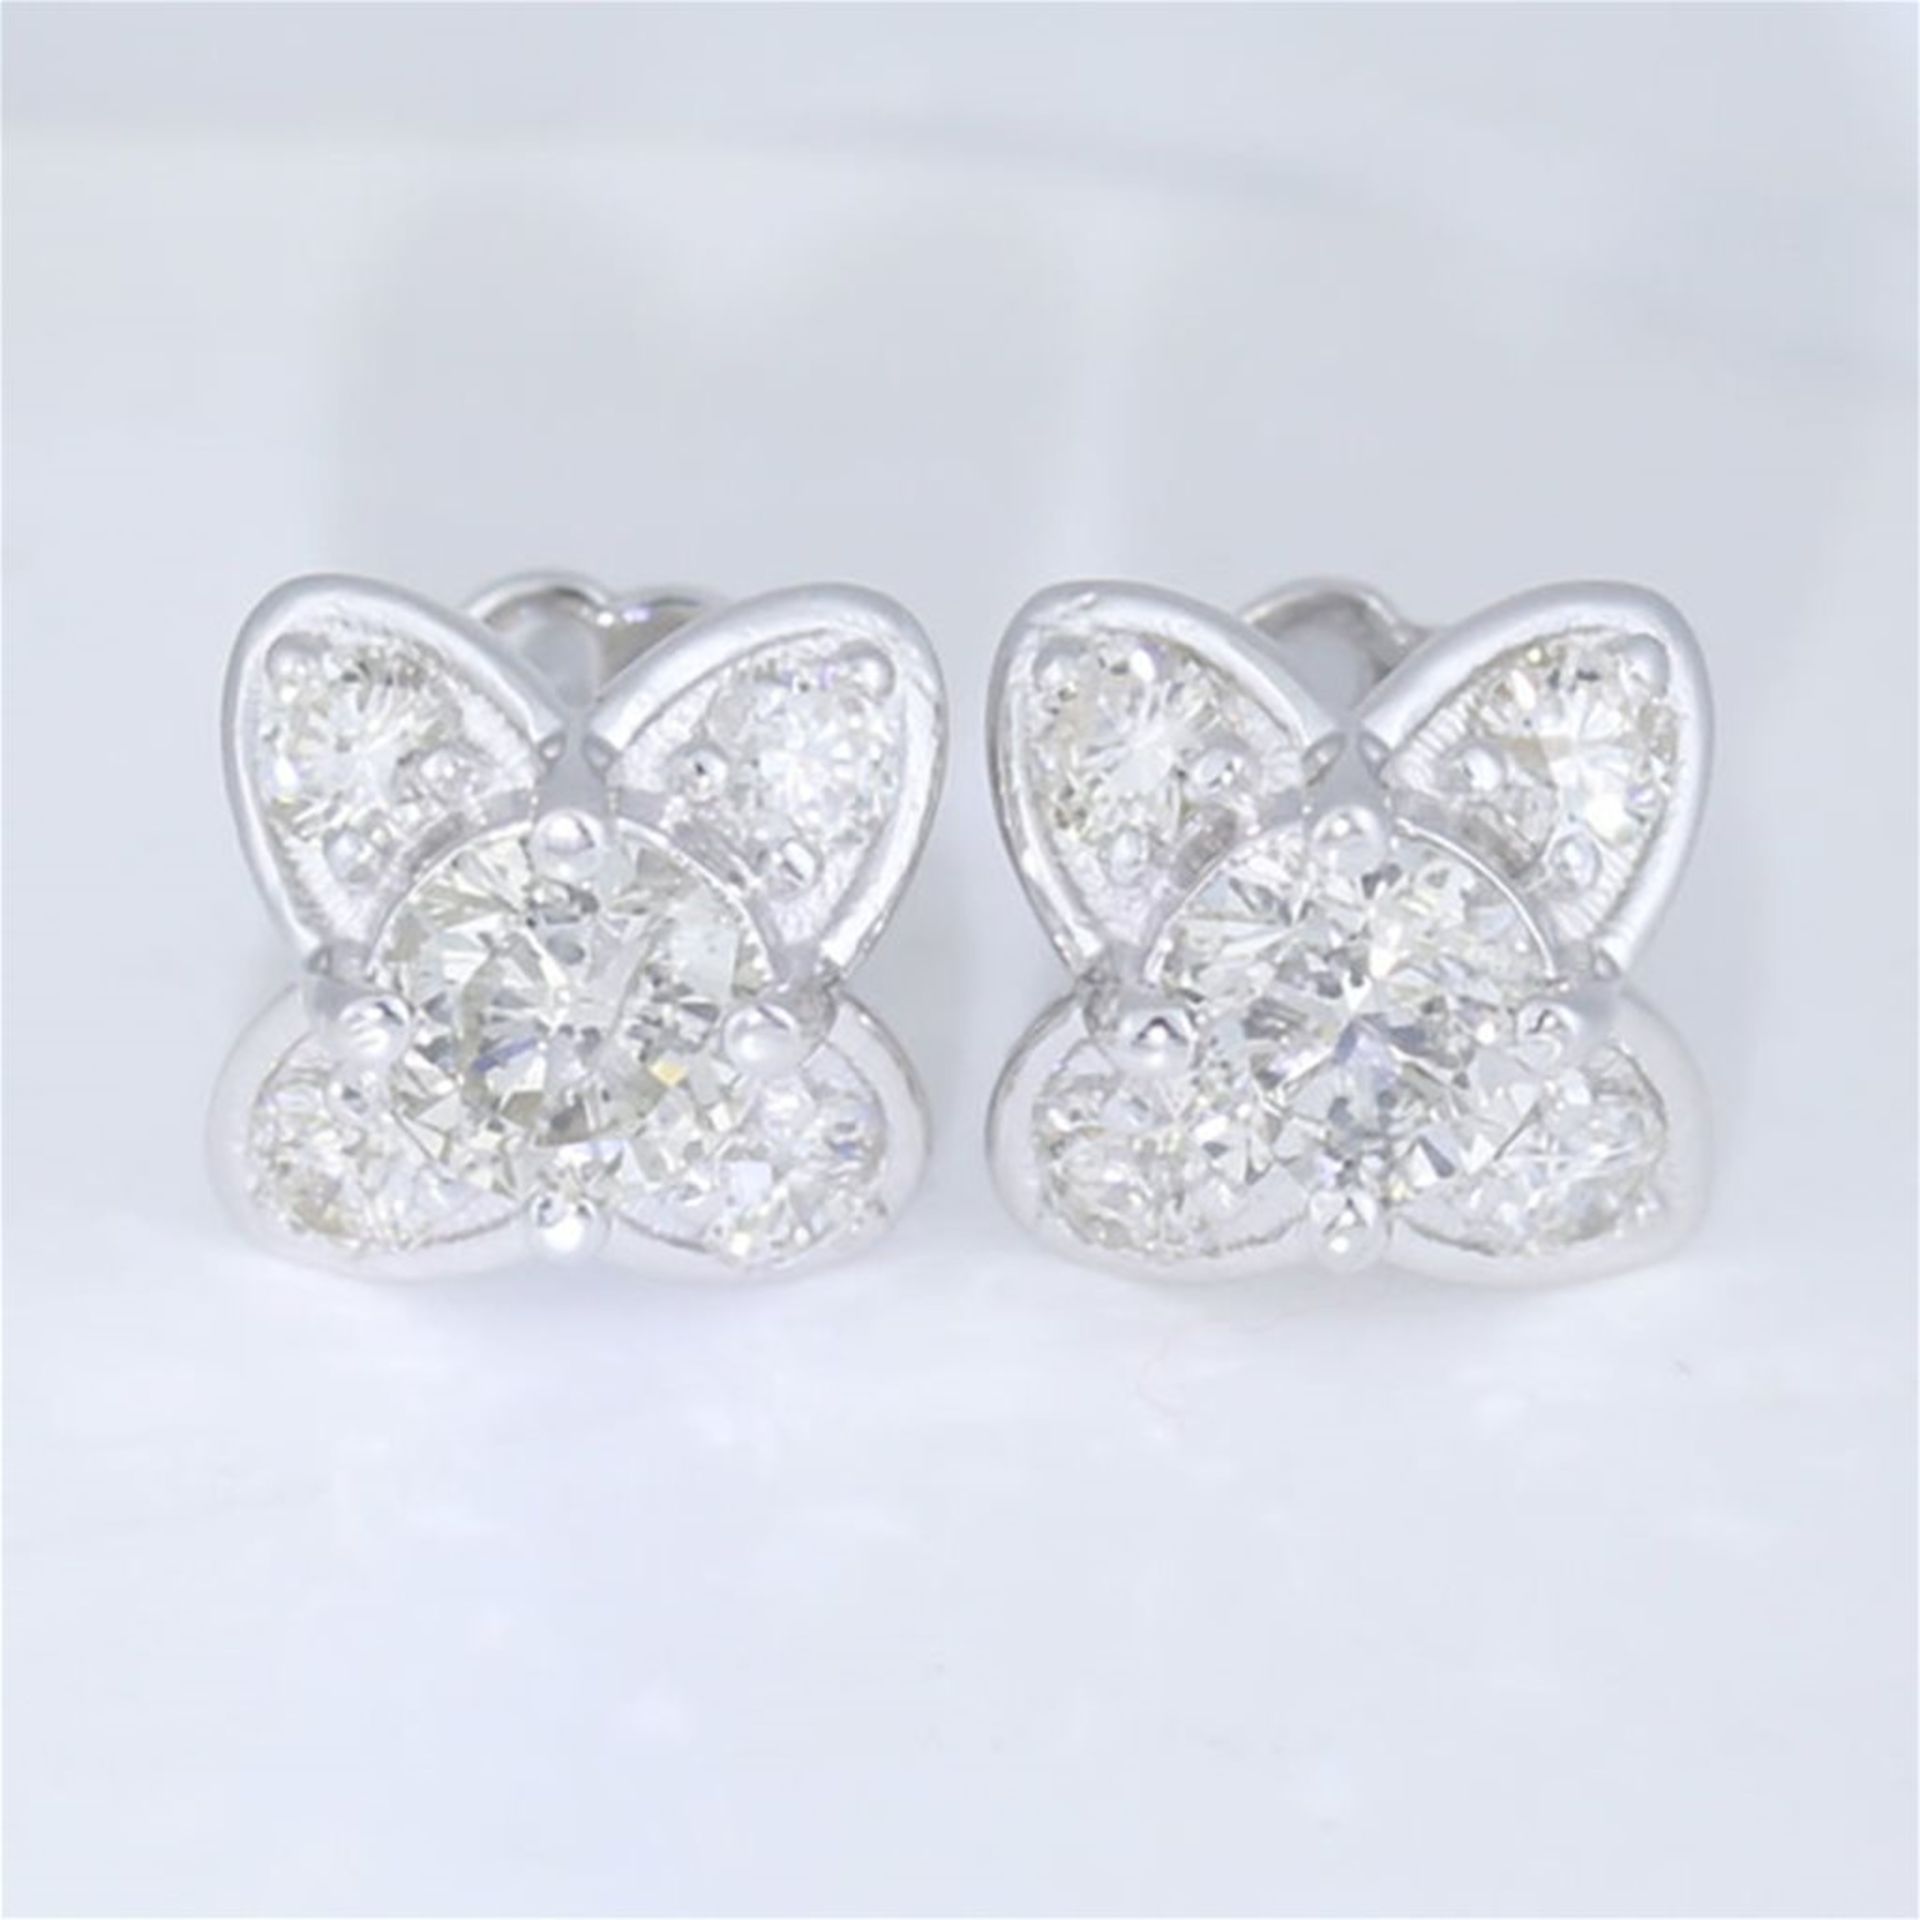 14 K / 585 Very Exclusive White Gold Solitaire Diamond Earrings